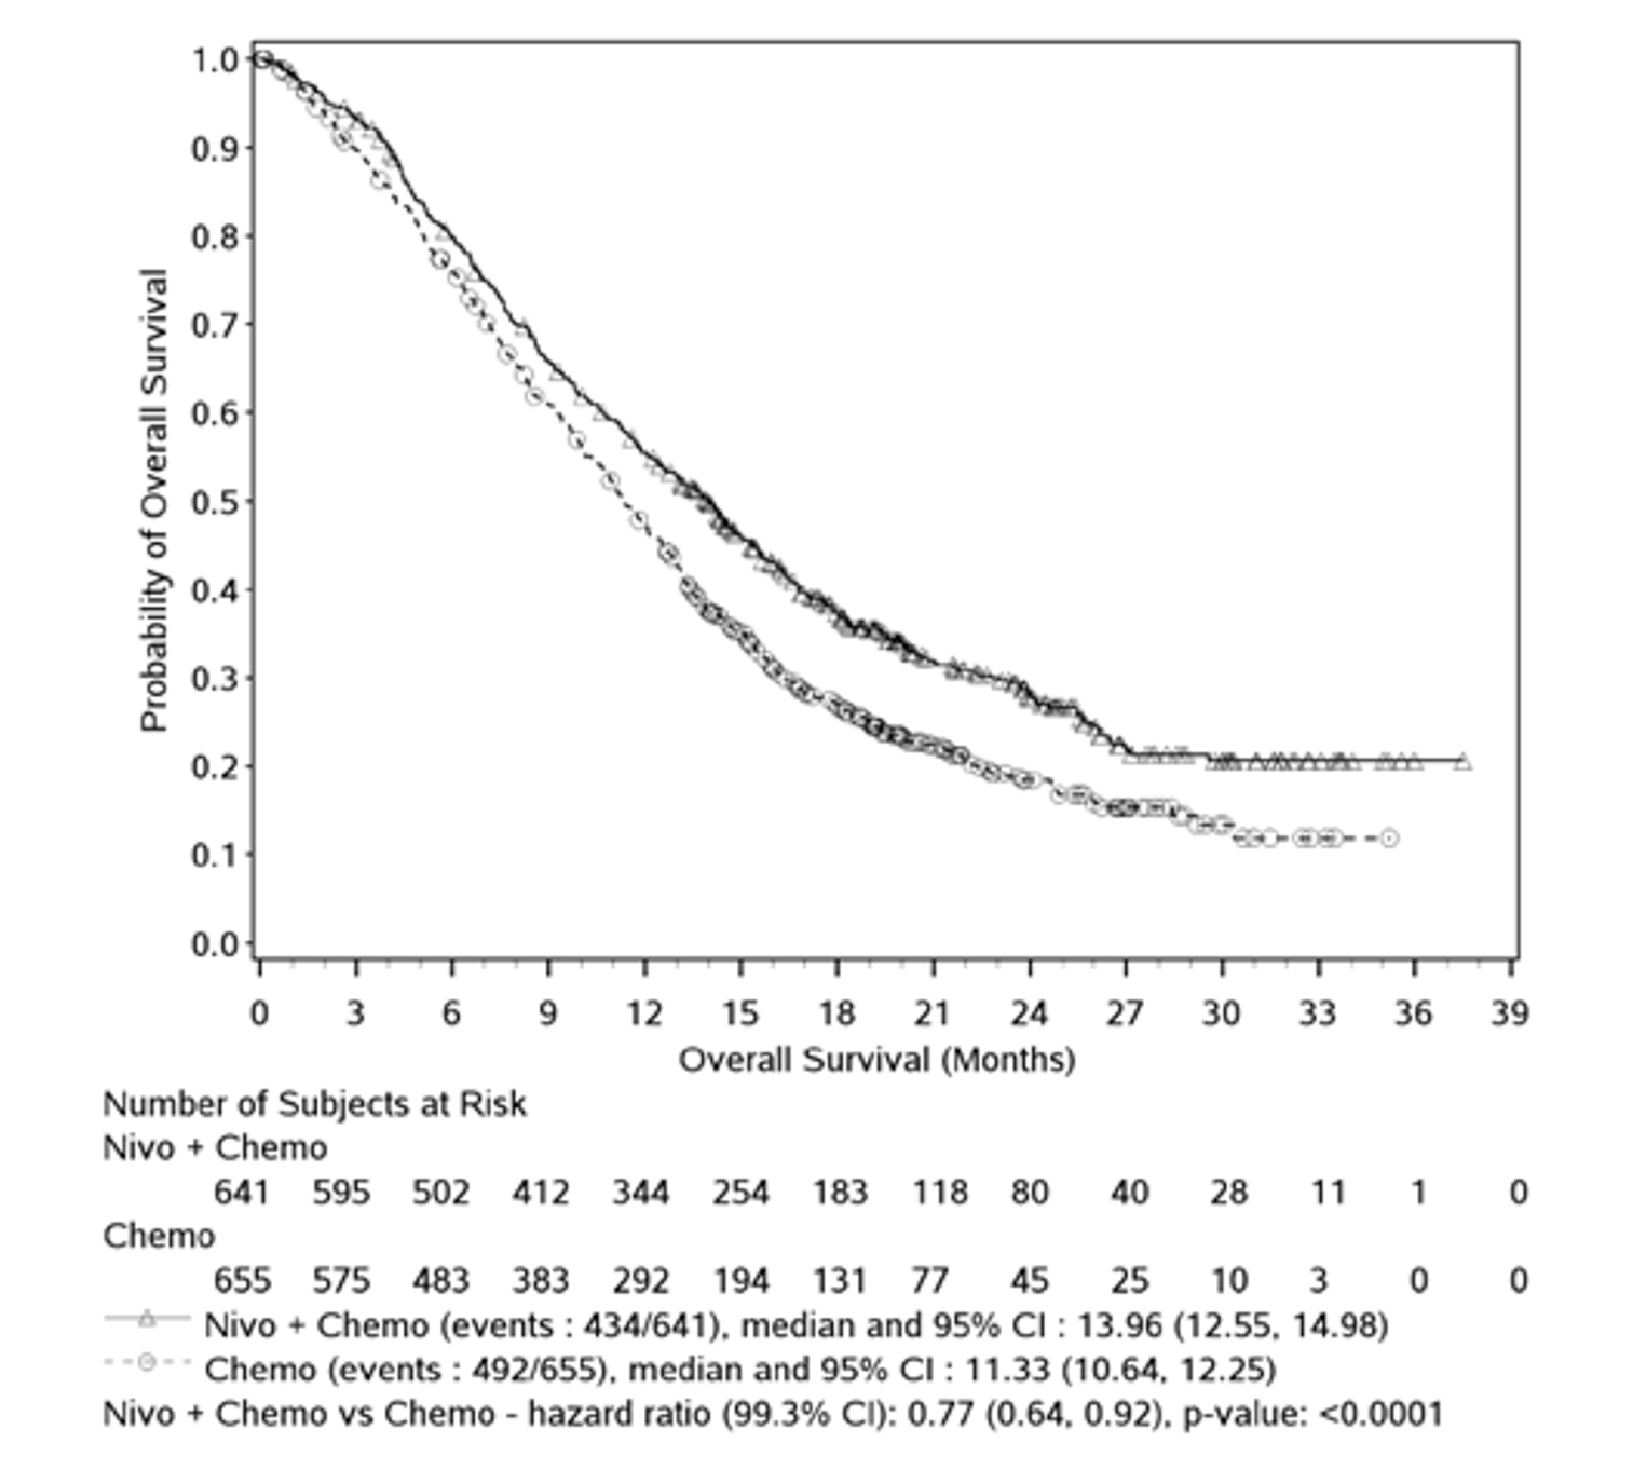 In this Kaplan-Meier analysis of OS among patients with PD-L1 CPS ≥ 1 in the CheckMate-649 trial, approximately 50% of patients receiving chemotherapy had died by 11 months, approximately 75% had died by 18 months, and approximately 85% had died by 30 months. In contrast, approximately 50% and 75% of patients receiving nivolumab plus chemotherapy had died by 14 months and 24 months, respectively, with only small decreases in survival probability thereafter. Median time to death was 13.96 (12.55 to 14.98) months among patients receiving nivolumab plus chemotherapy and 11.33 (95% CI, 10.64 to 12.25) months among patients receiving chemotherapy (HR 0.77; 99.3% CI, 0.64 to 0.92; P < 0.0001). The number of at-risk patients receiving nivolumab plus chemotherapy at 0, 3, 6, 9, 12, 15, 18, 21, 24, 27, 30, 33, 36, and 39 months was 641, 595, 502, 412, 344, 254, 183, 118, 80, 40, 28, 11, 1, and 0, respectively. The number of at-risk patients receiving chemotherapy at 0, 3, 6, 9, 12, 15, 18, 21, 24, 27, 30, 33, 36, and 39 months was 655, 575, 483, 383, 292, 194, 131, 77, 45, 25, 10, 3, 0, and 0, respectively.